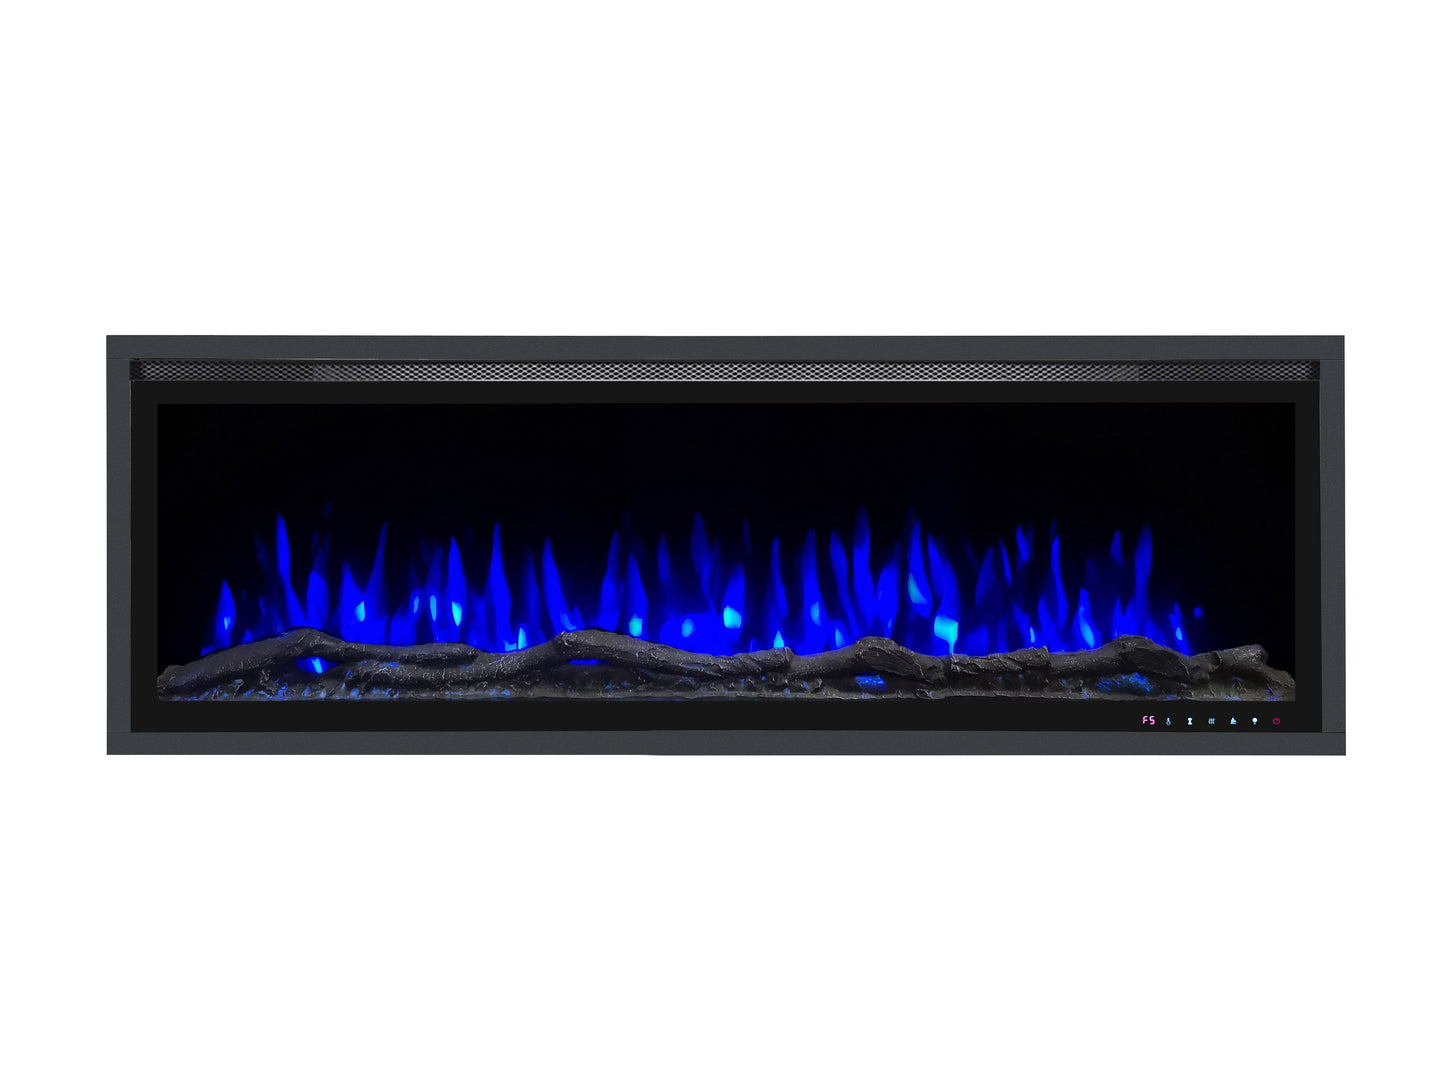 Sparkling Series 50 Inch Built-in & Wall Mount Electric Fireplace